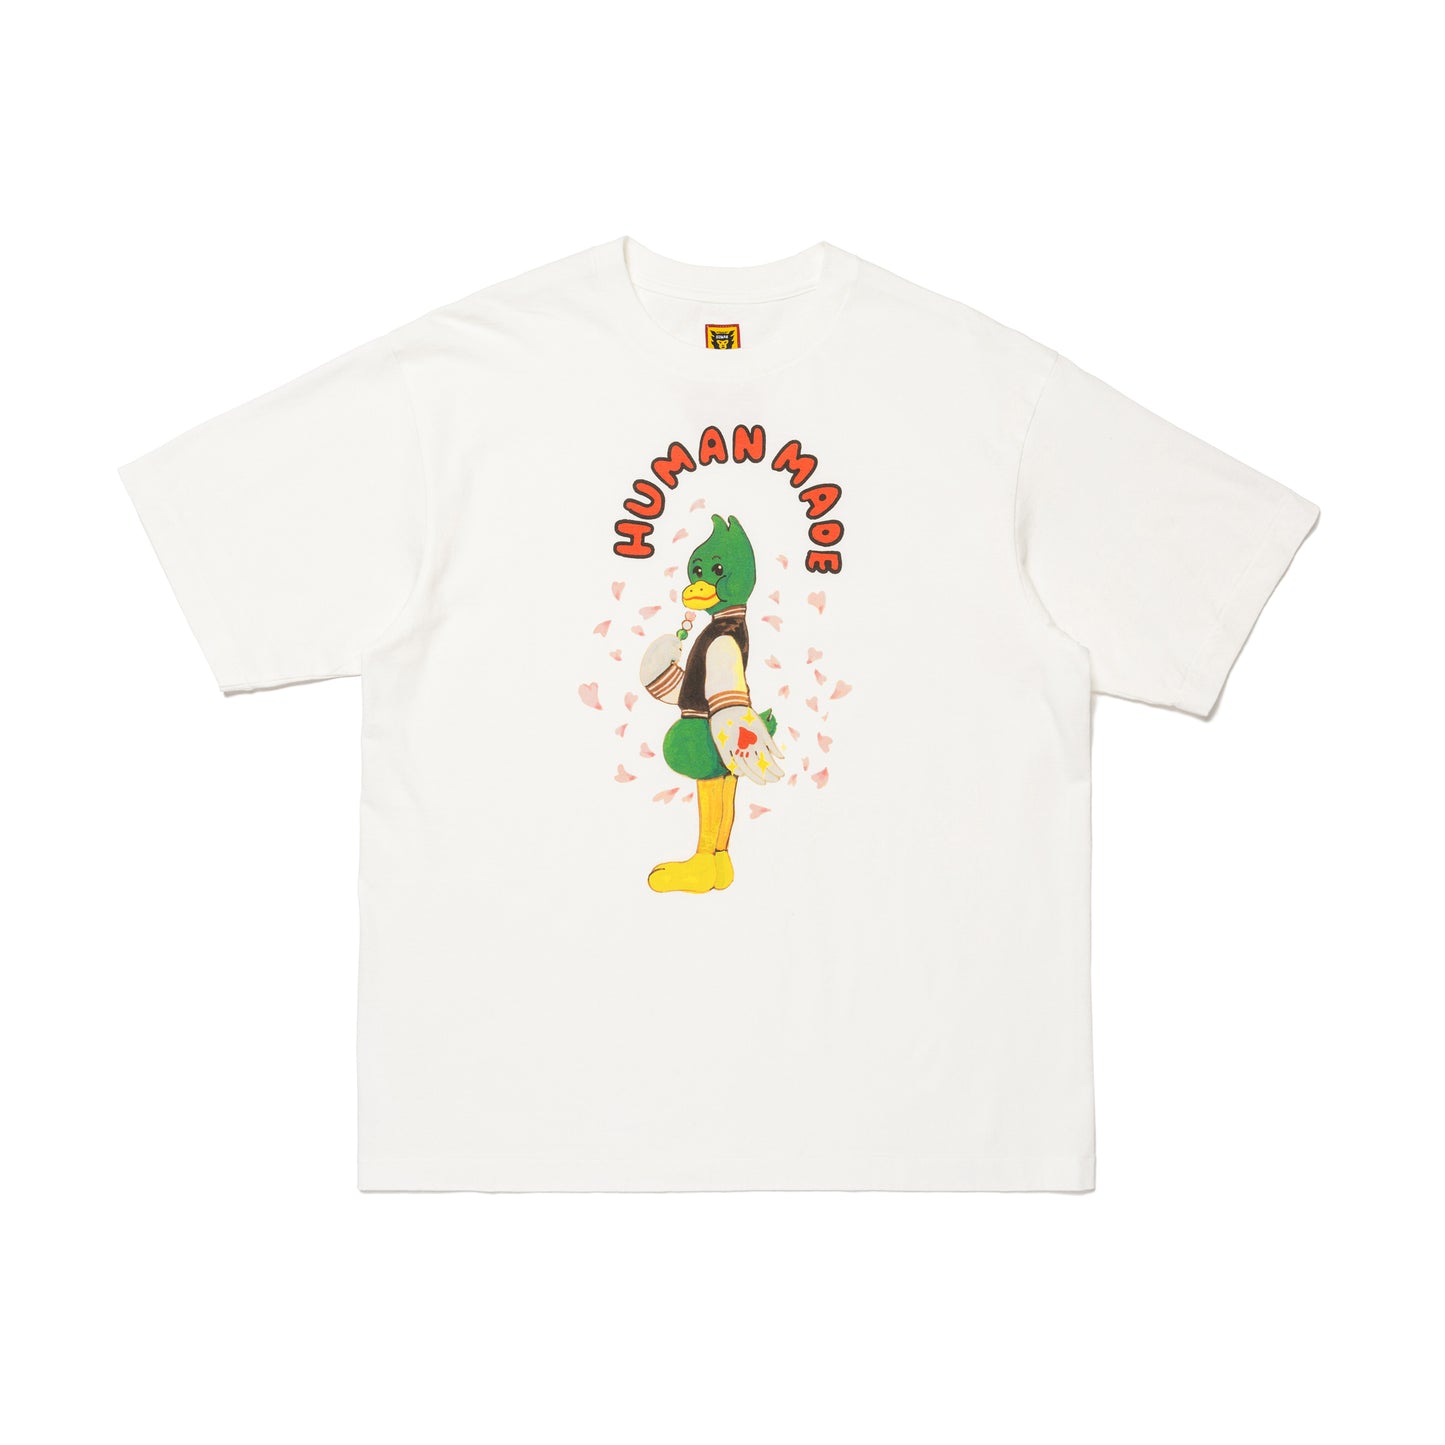 KEIKO SOOTOME T-SHIRT #19 – HUMAN MADE ONLINE STORE